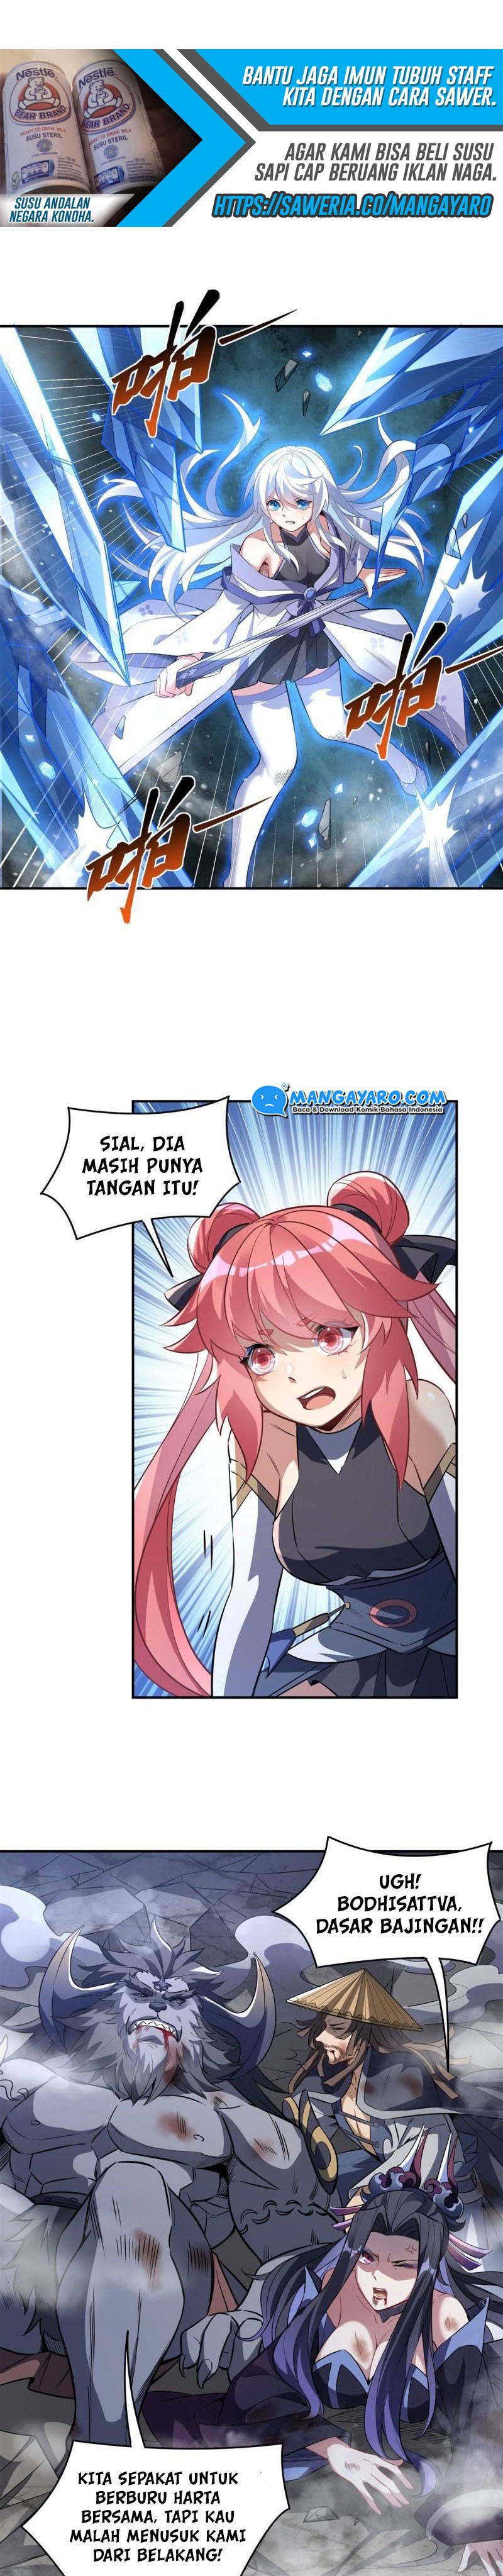 Dilarang COPAS - situs resmi www.mangacanblog.com - Komik my female apprentices are all big shots from the future 067 - chapter 67 68 Indonesia my female apprentices are all big shots from the future 067 - chapter 67 Terbaru 7|Baca Manga Komik Indonesia|Mangacan